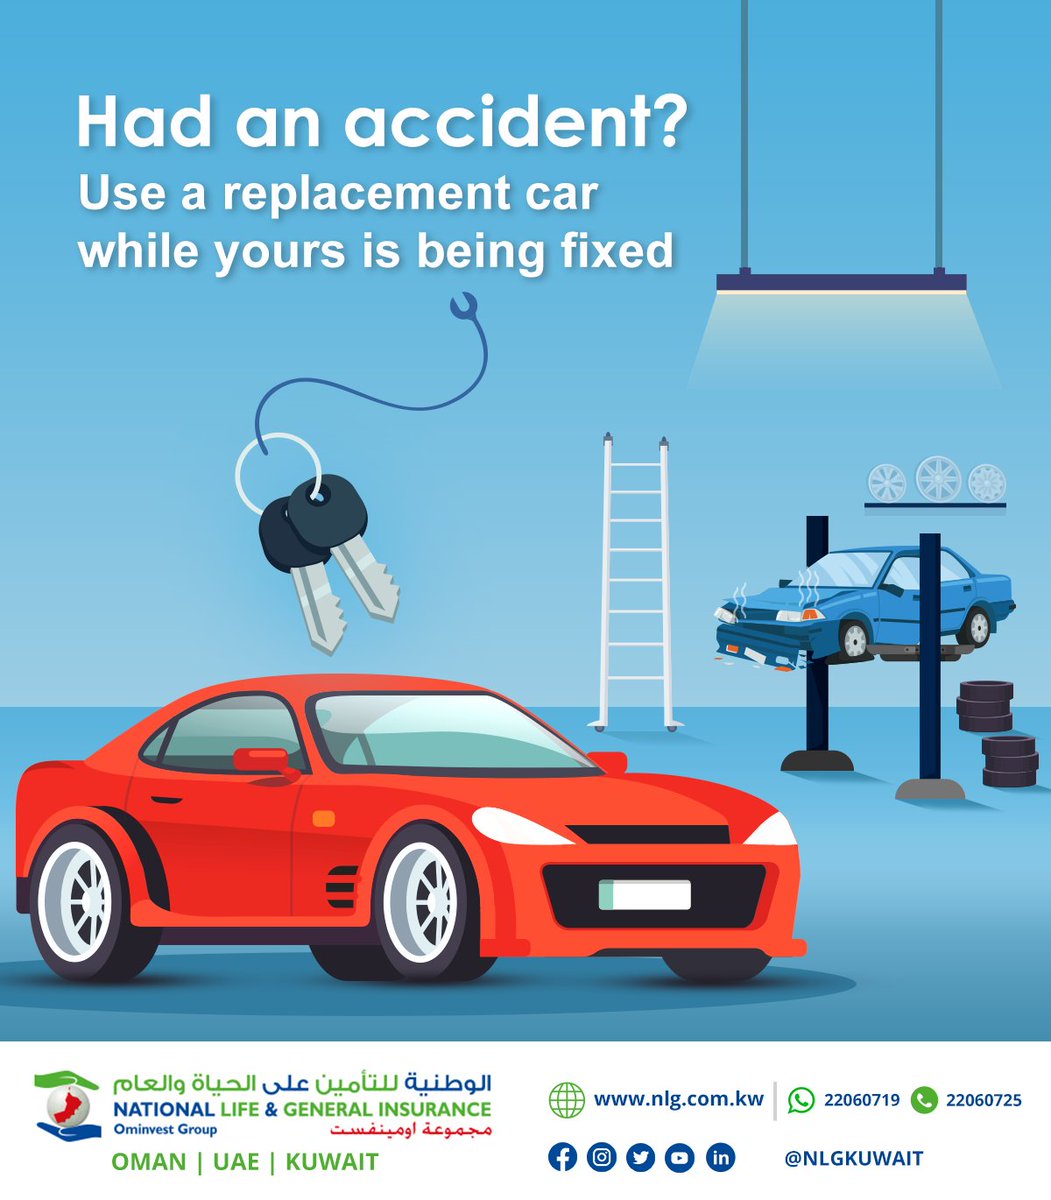 Your car repair taking longer than expected? Connect with us at NLG to get a replacement vehicle while yours is being fixed.
To know more, visit: nlg.com.kw

#motorinsurance #carreplacement #generalinsurance #NLG #Kuwait